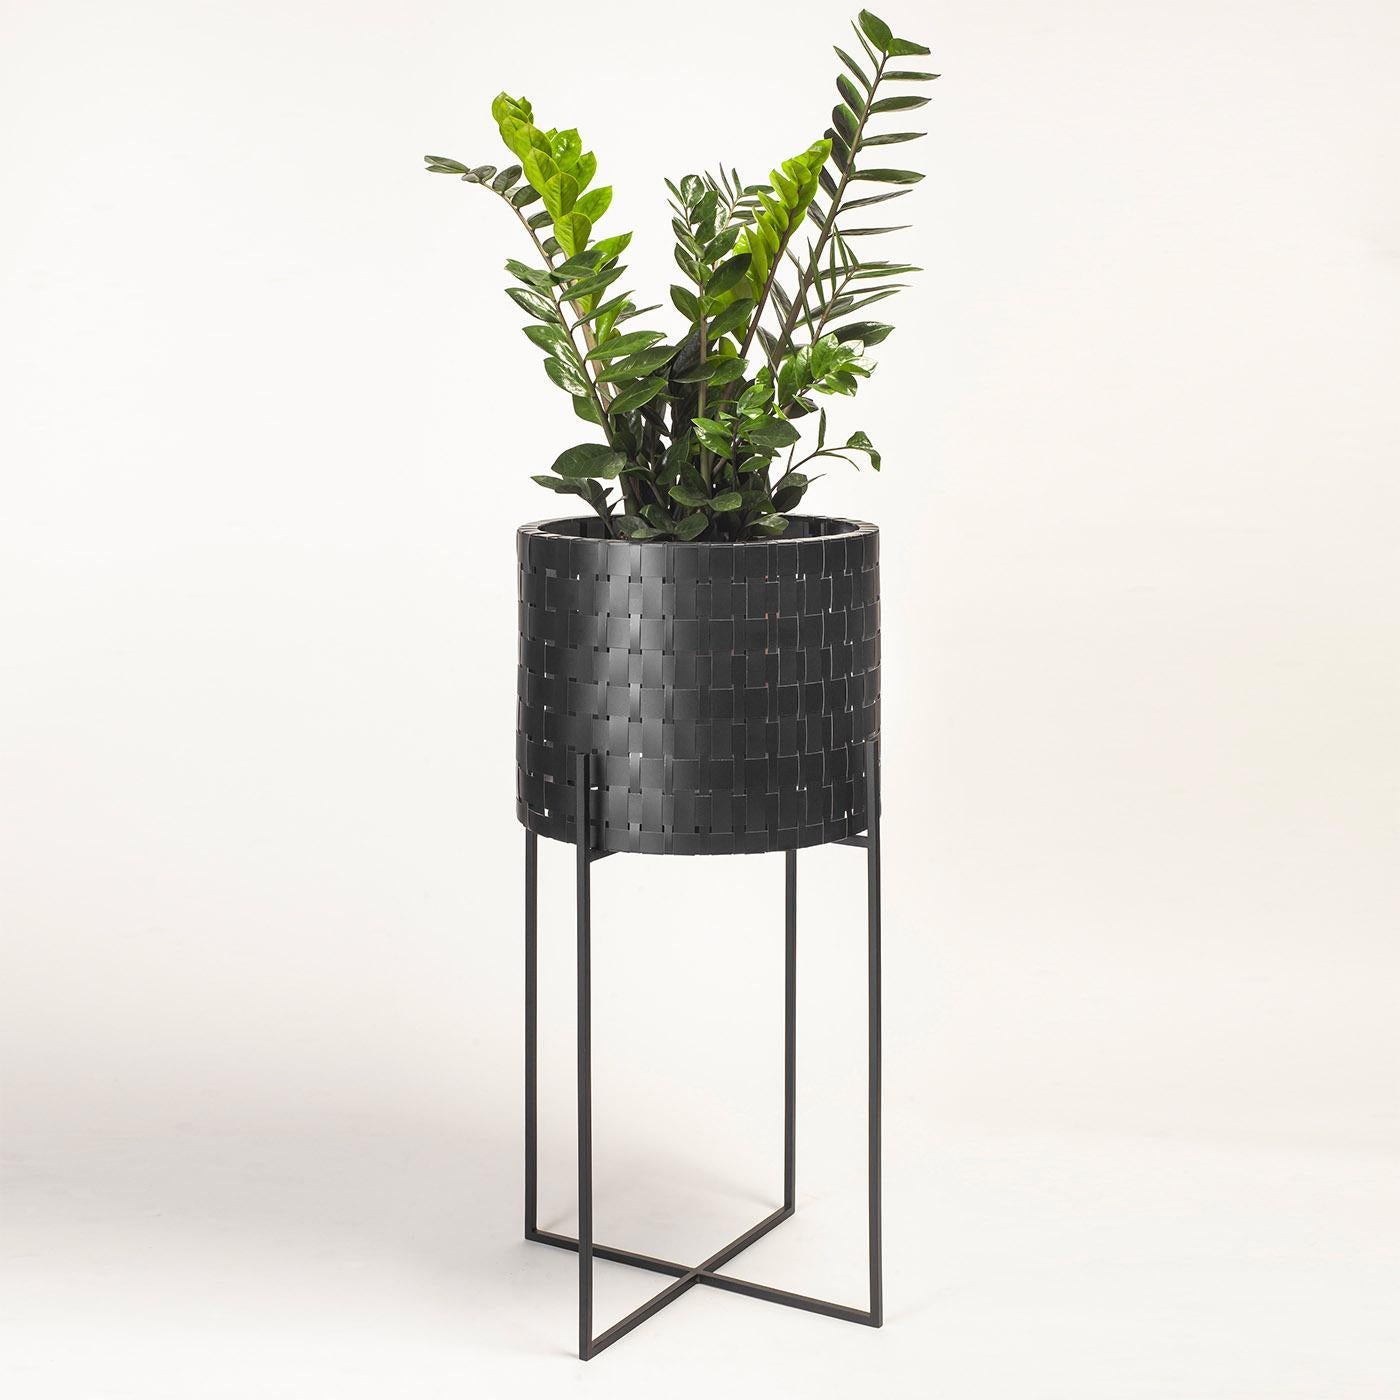 A celebration of simplicity, this side table features clean and essential lines of absolute elegance. Ideally complementing a living room decor, flanking a refined sofa of contemporary sophistication, embellished with vases, statuettes, or